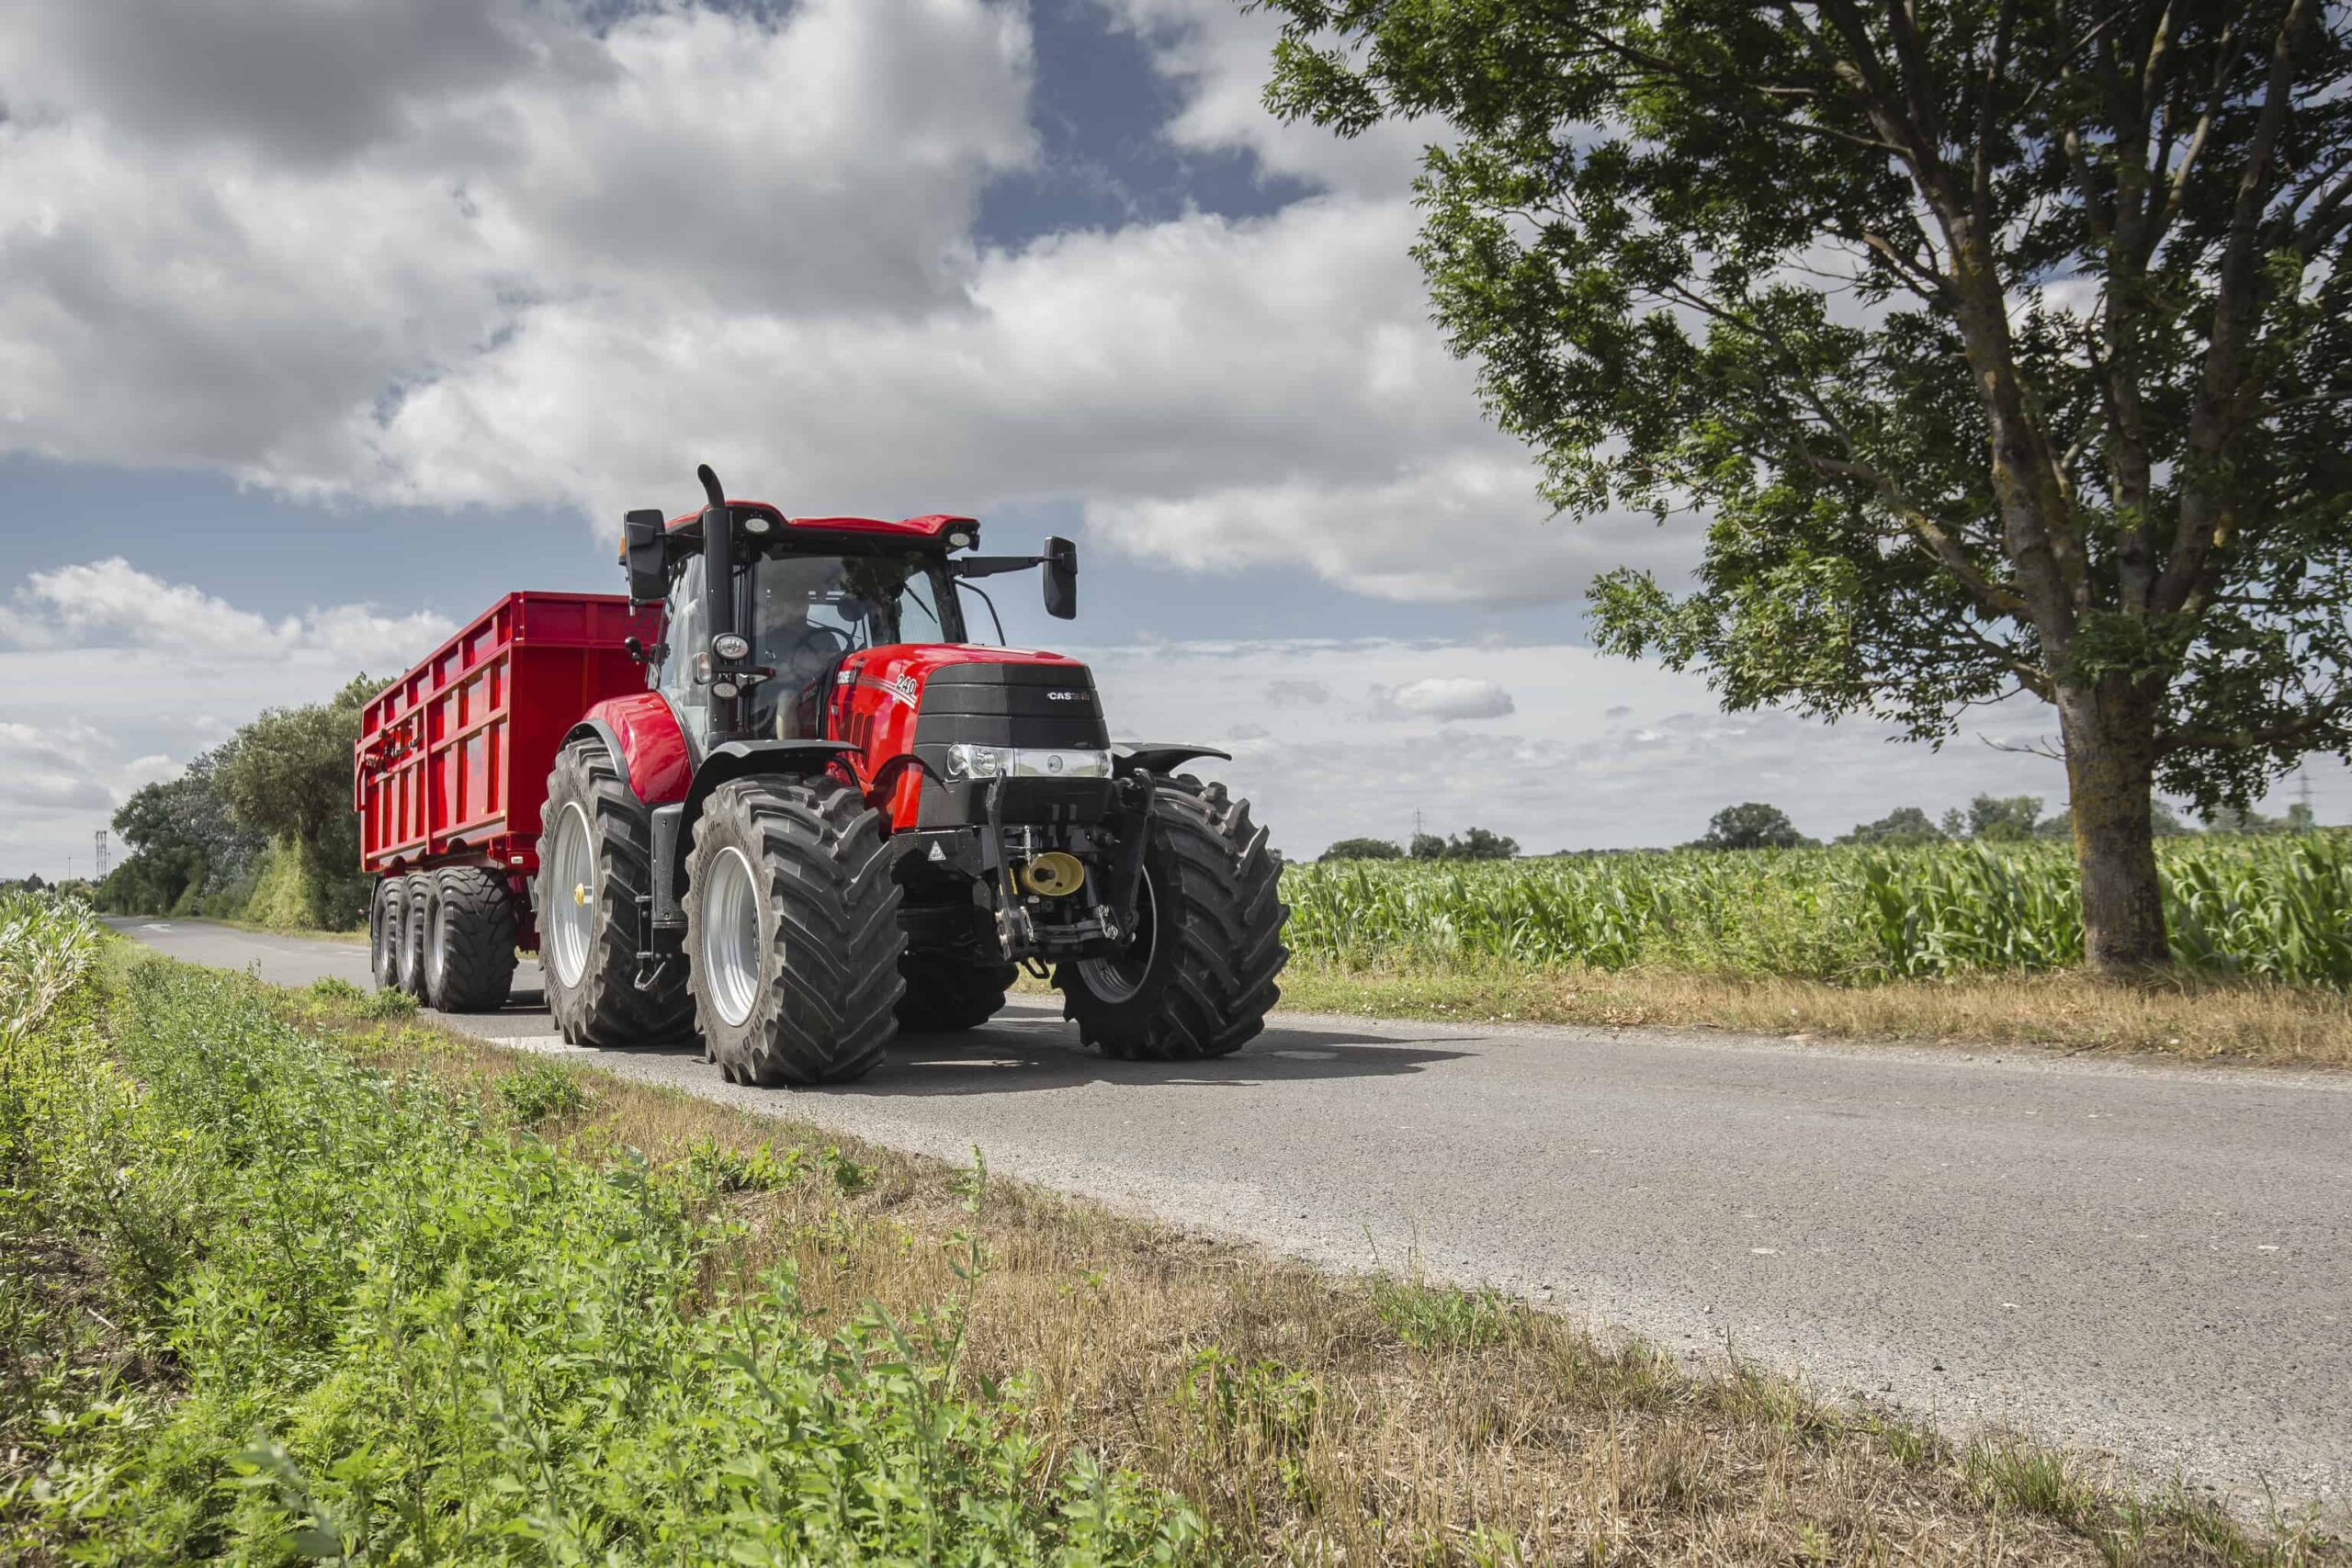 New Stage V Puma 185-240hp tractors benefit from Hi-eSCR2 technology, extended service intervals and operation upgrades